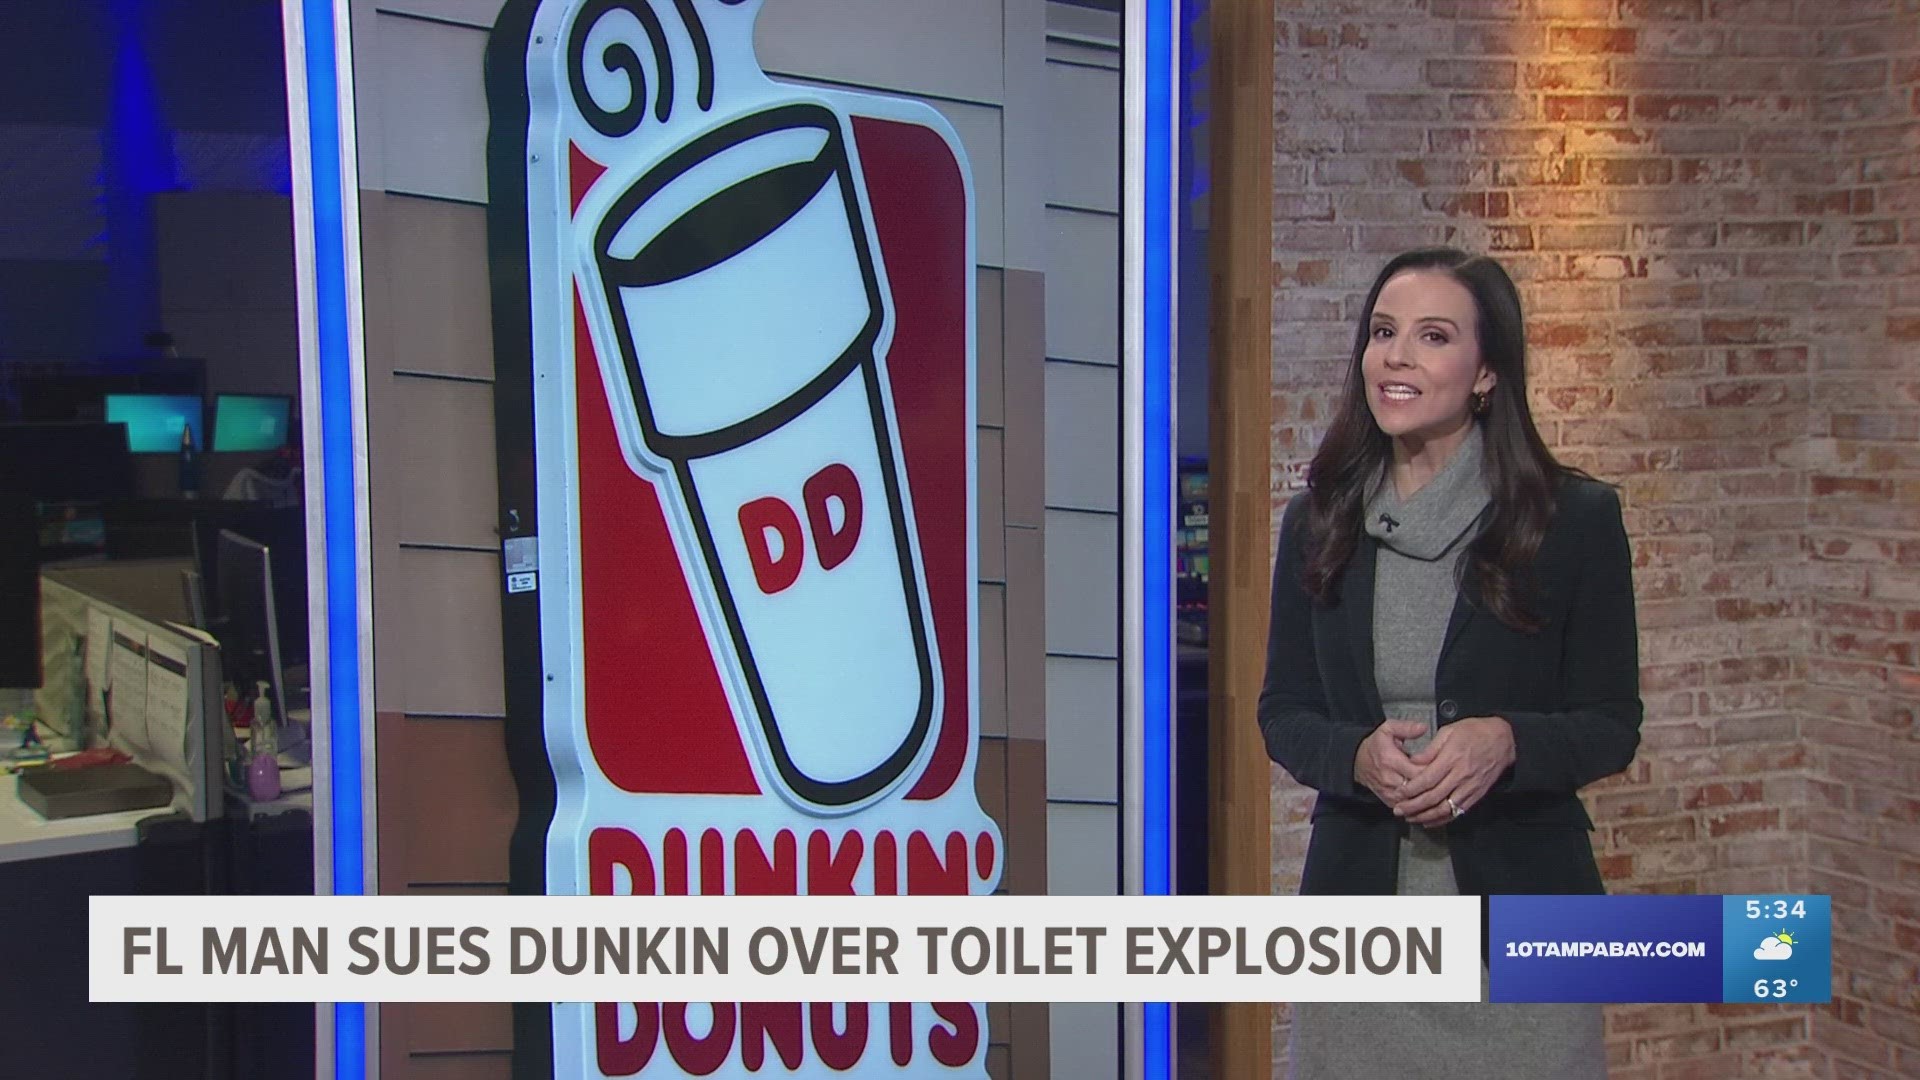 A customer who claims he was injured by an exploding toilet at a Dunkin' store in central Florida has filed a negligence lawsuit against the coffee chain.